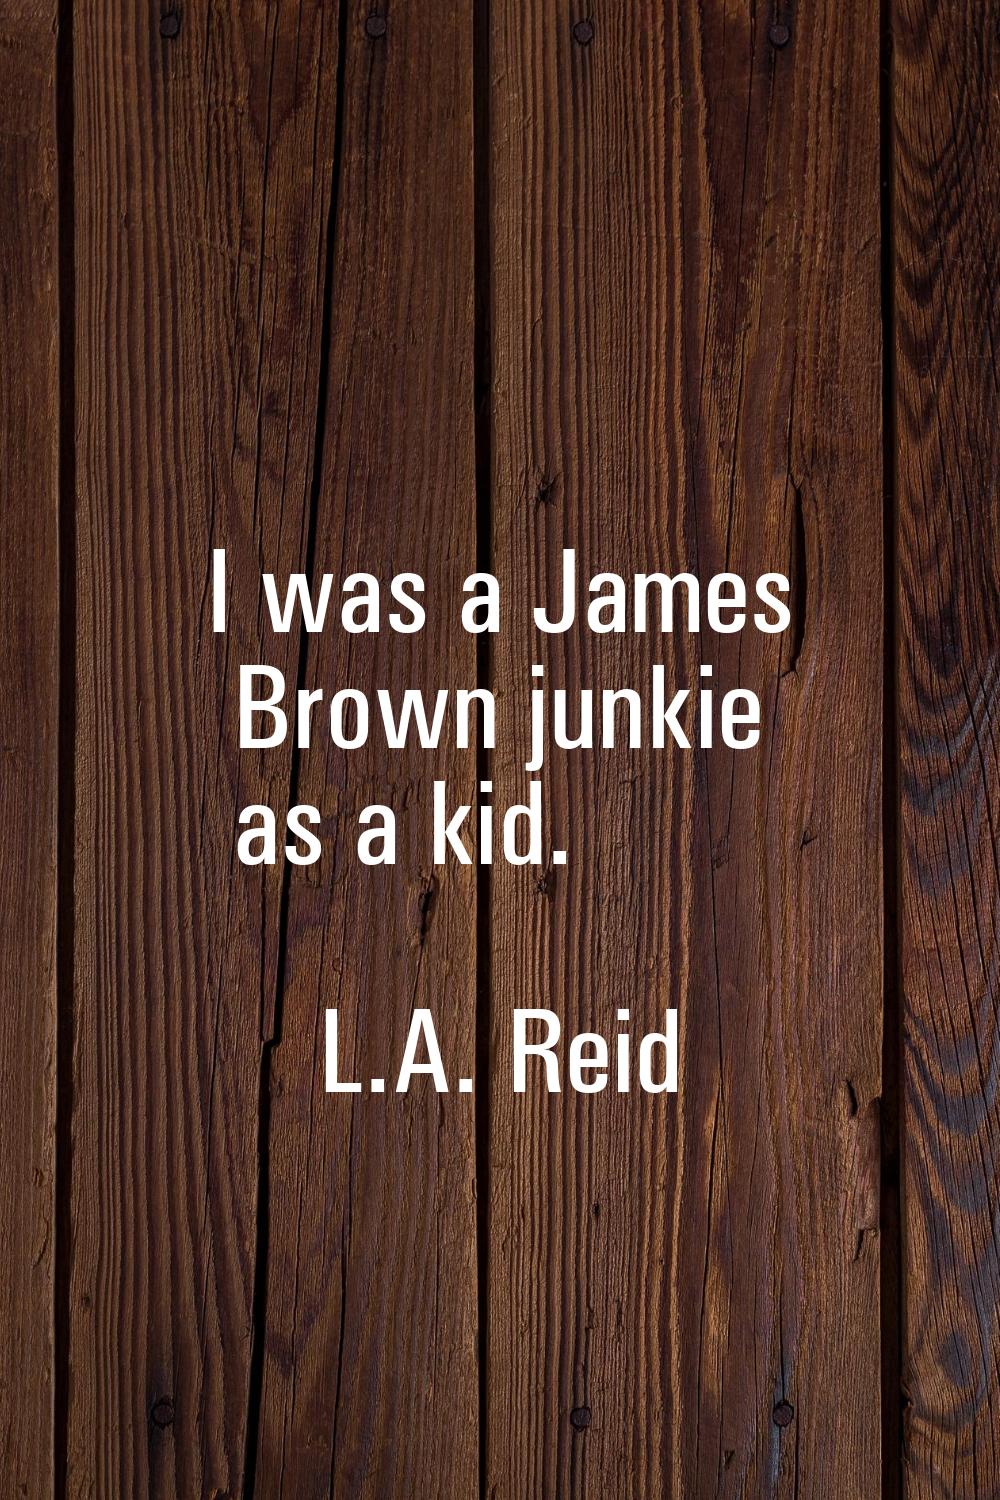 I was a James Brown junkie as a kid.